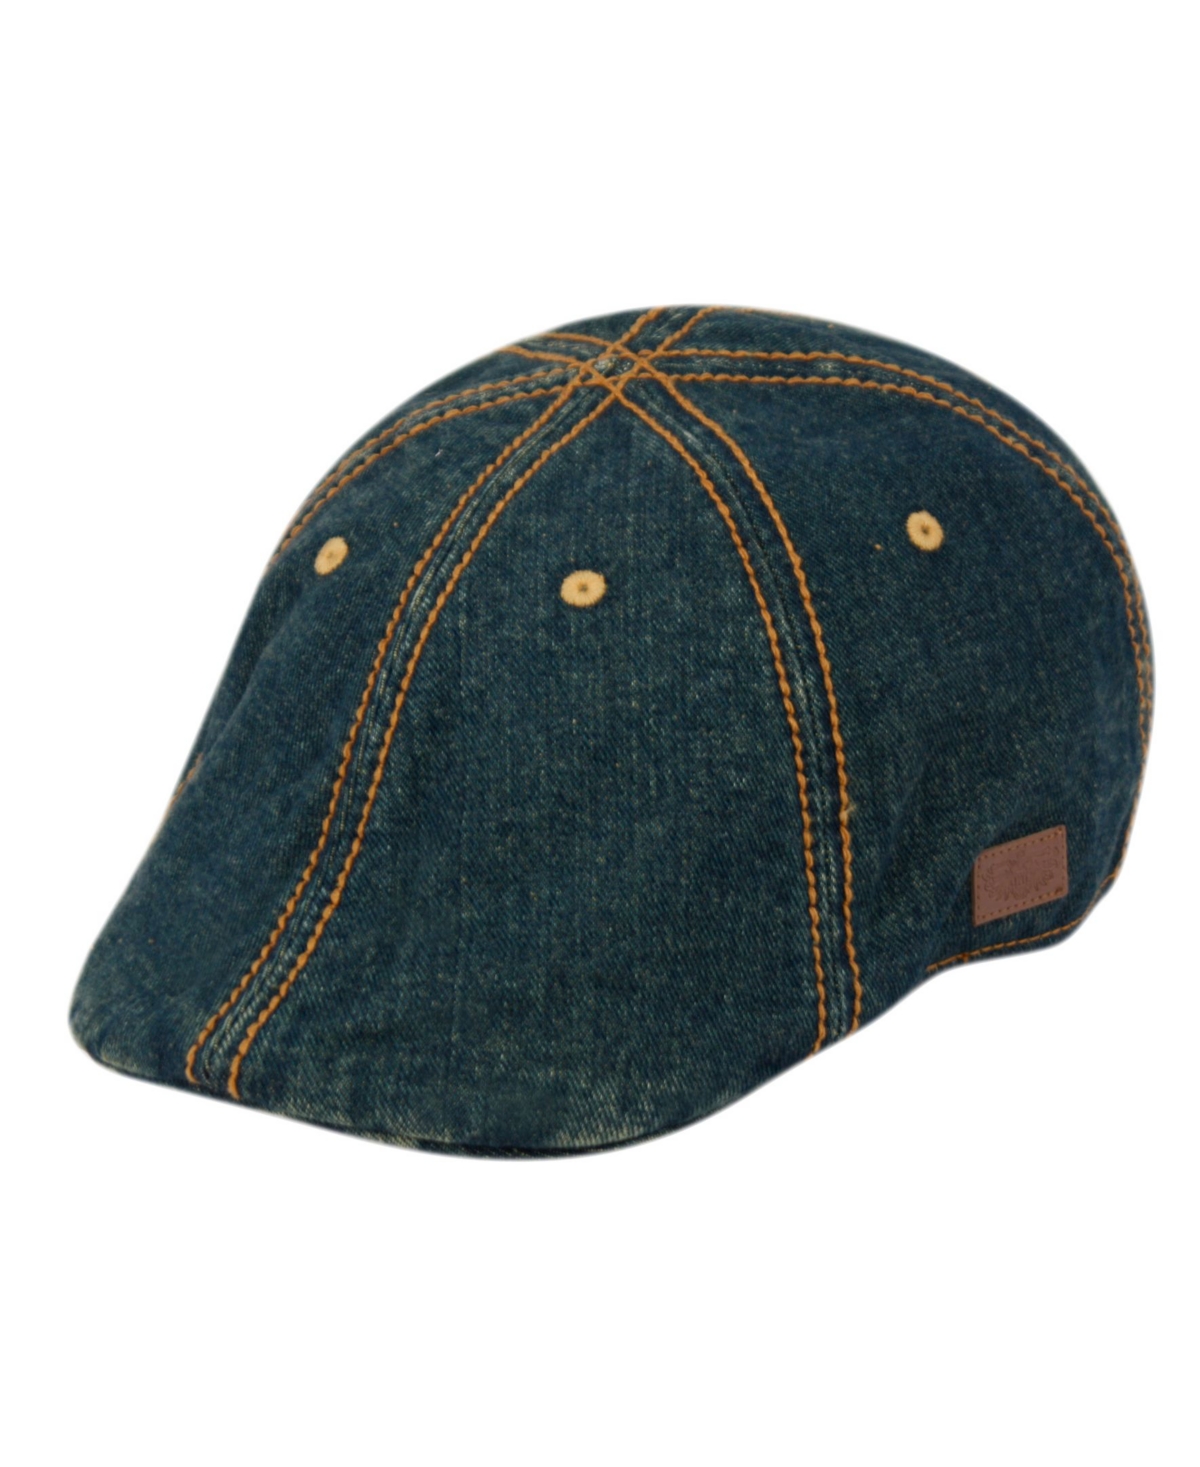 Duckbill Ivy Cap with Stitching - Blue